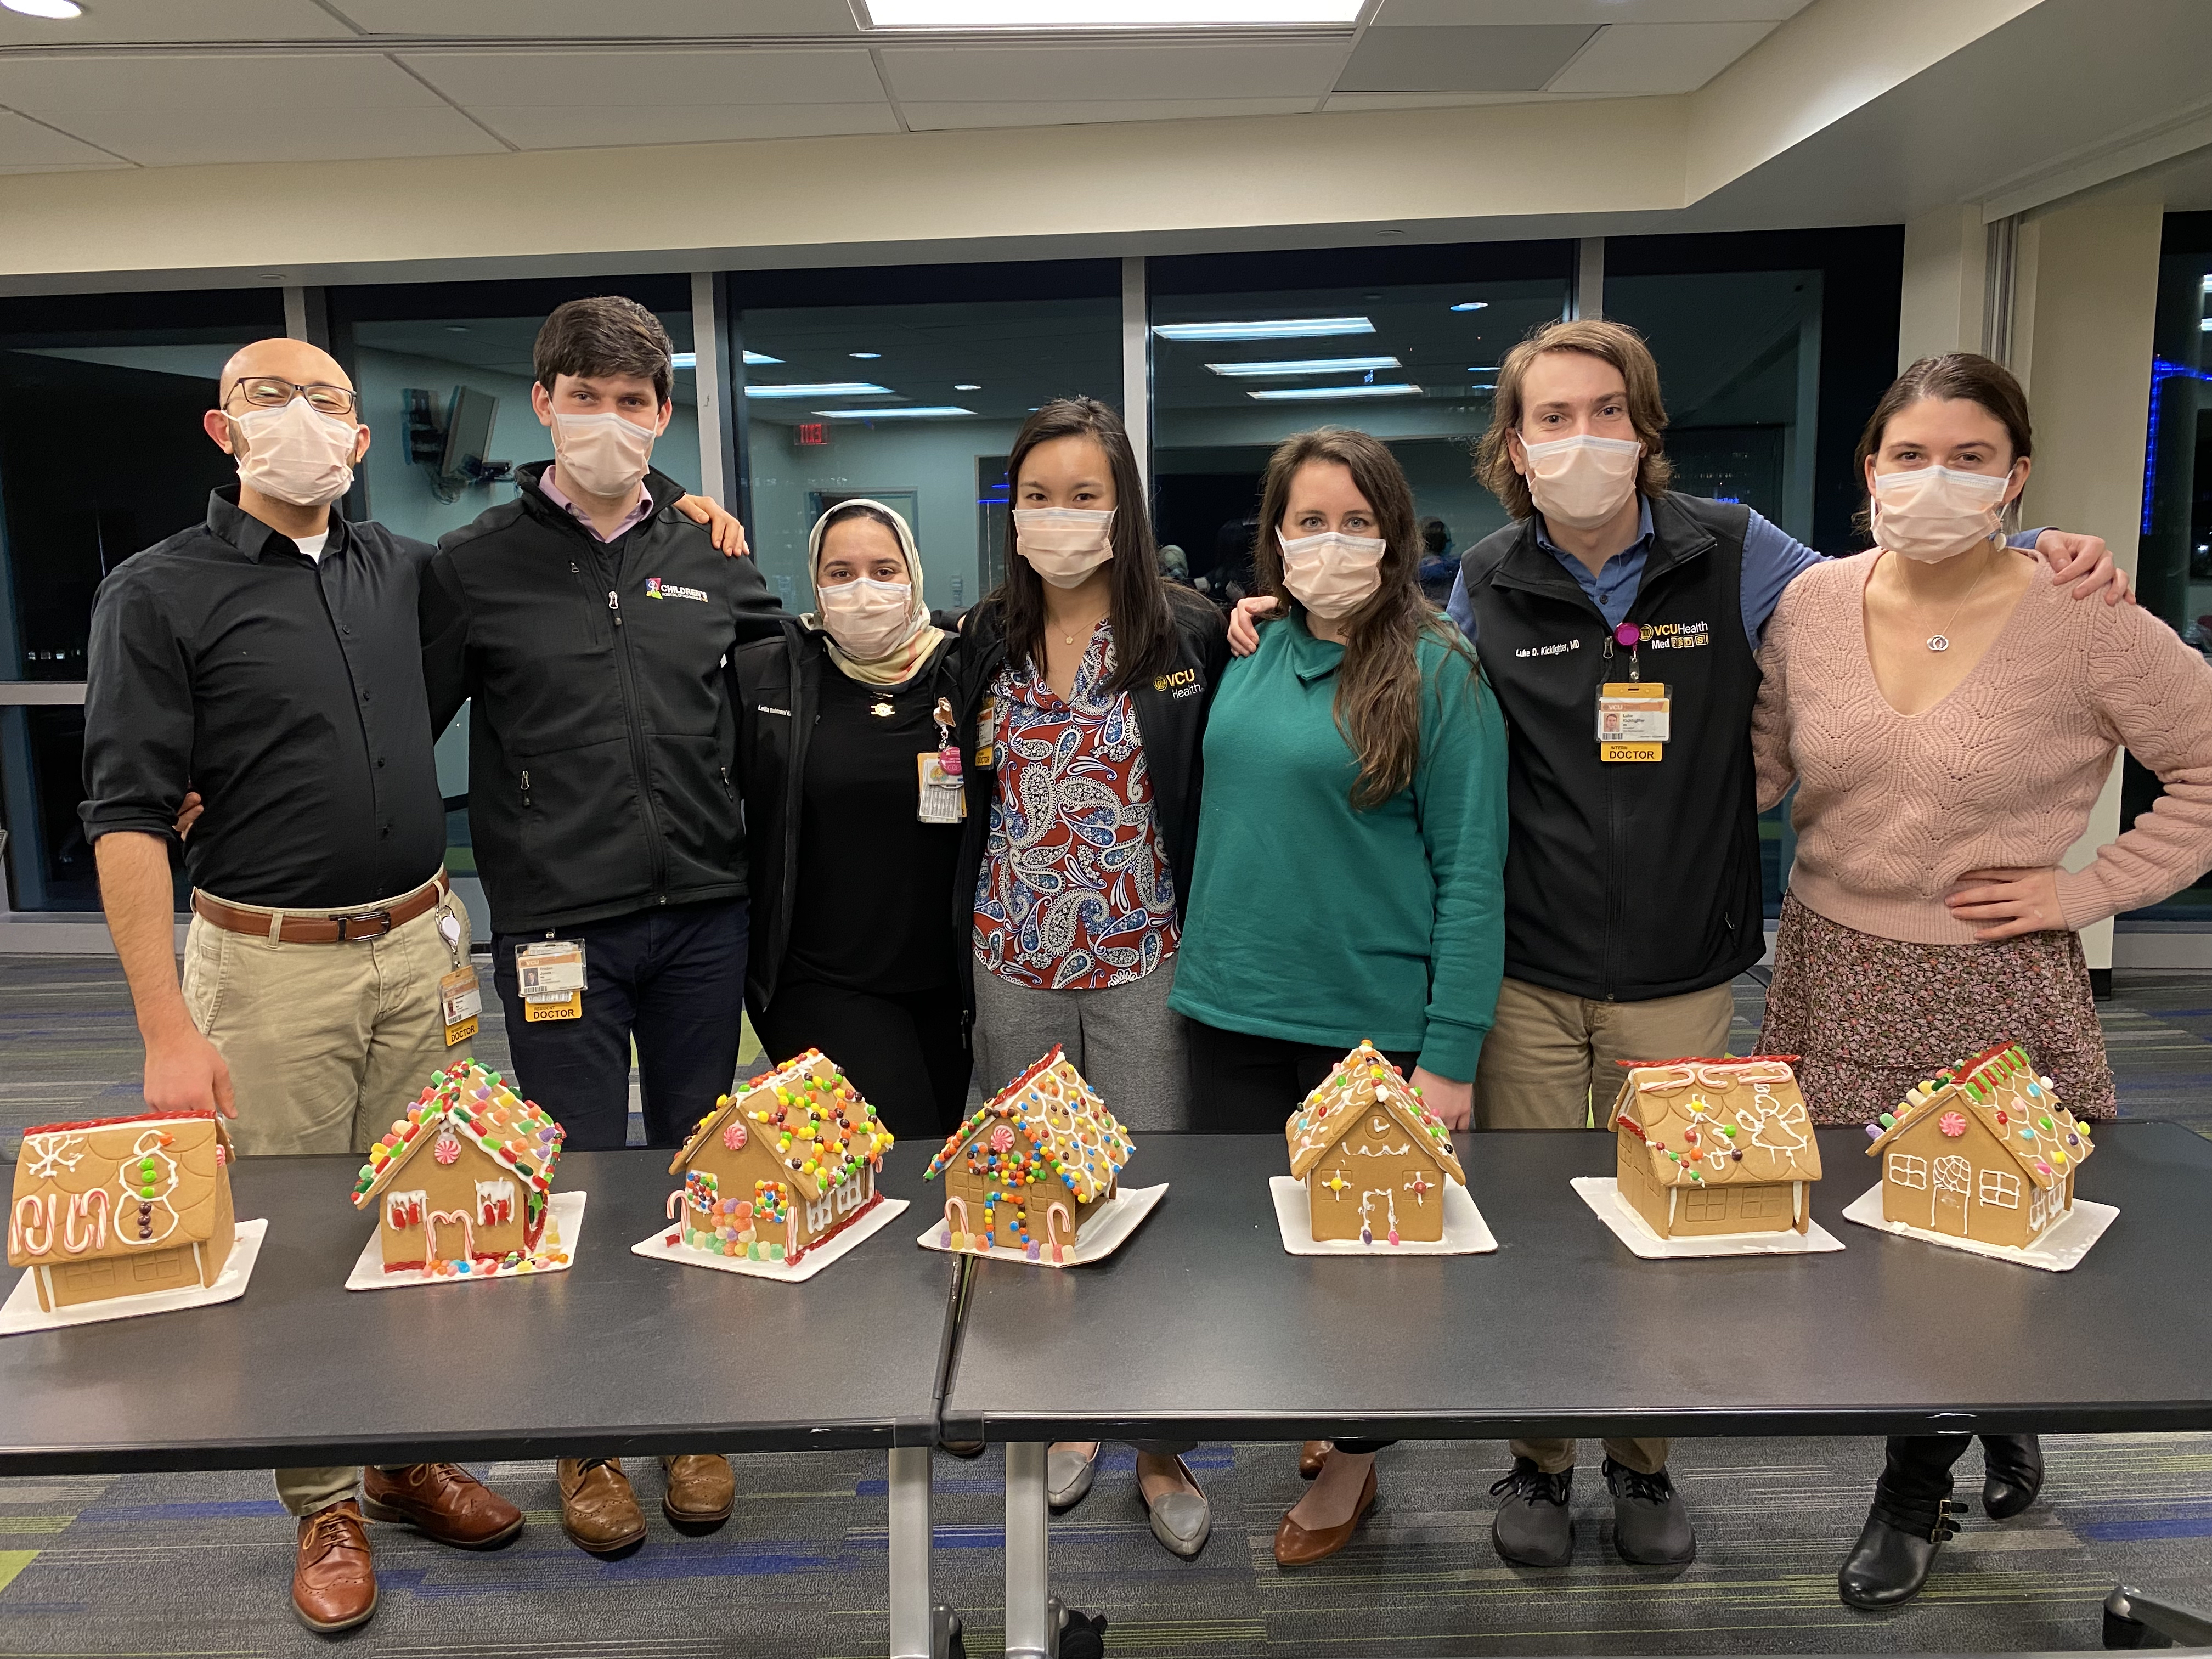 Residents posing for a photo with the gingerbread houses they decorated